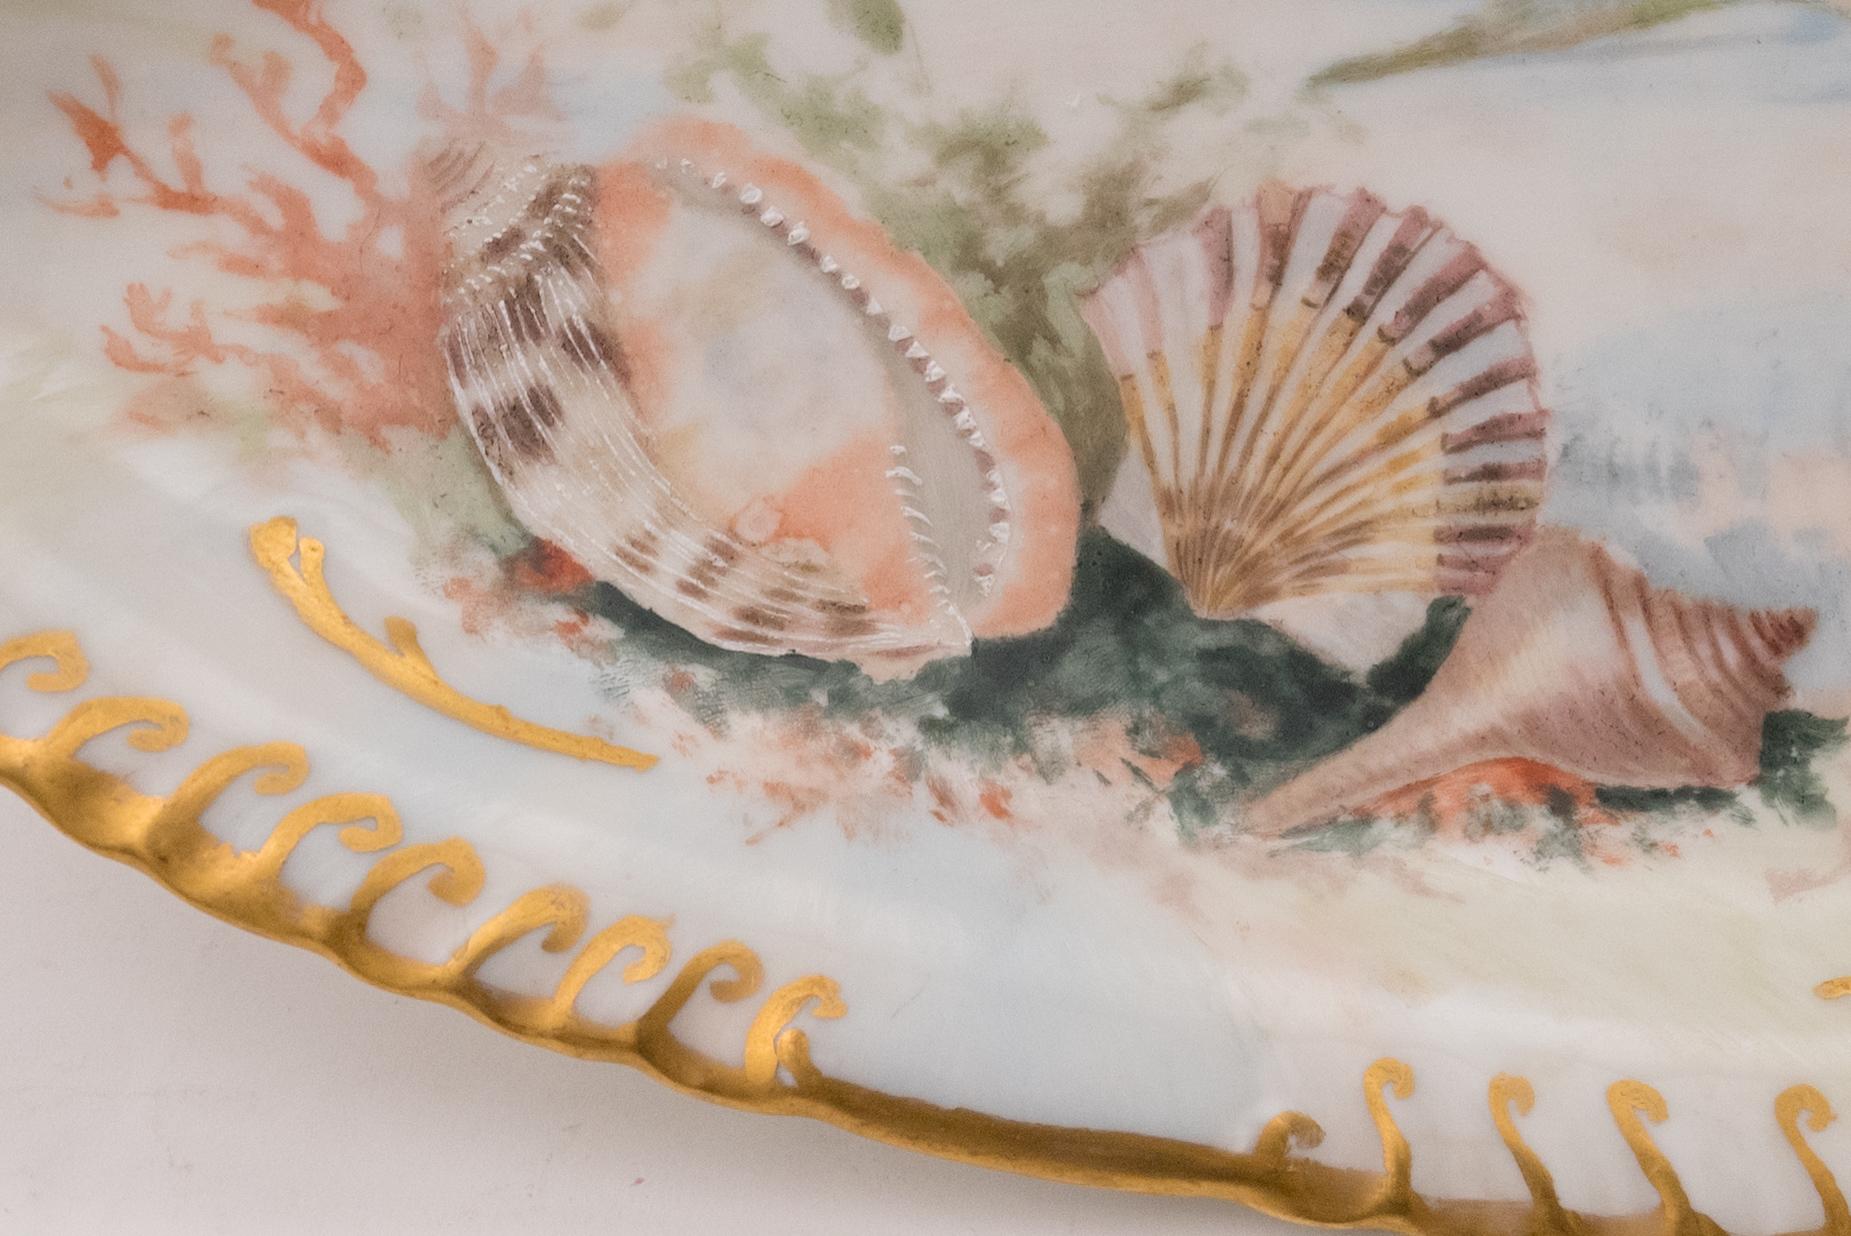 A large platter ready for your fish service or to be a great accent piece to your display cabinet. This piece has a nice scalloped shape to the rim and is hand painted with a central fish and sea shell, coral, fauna accents. In really great antique